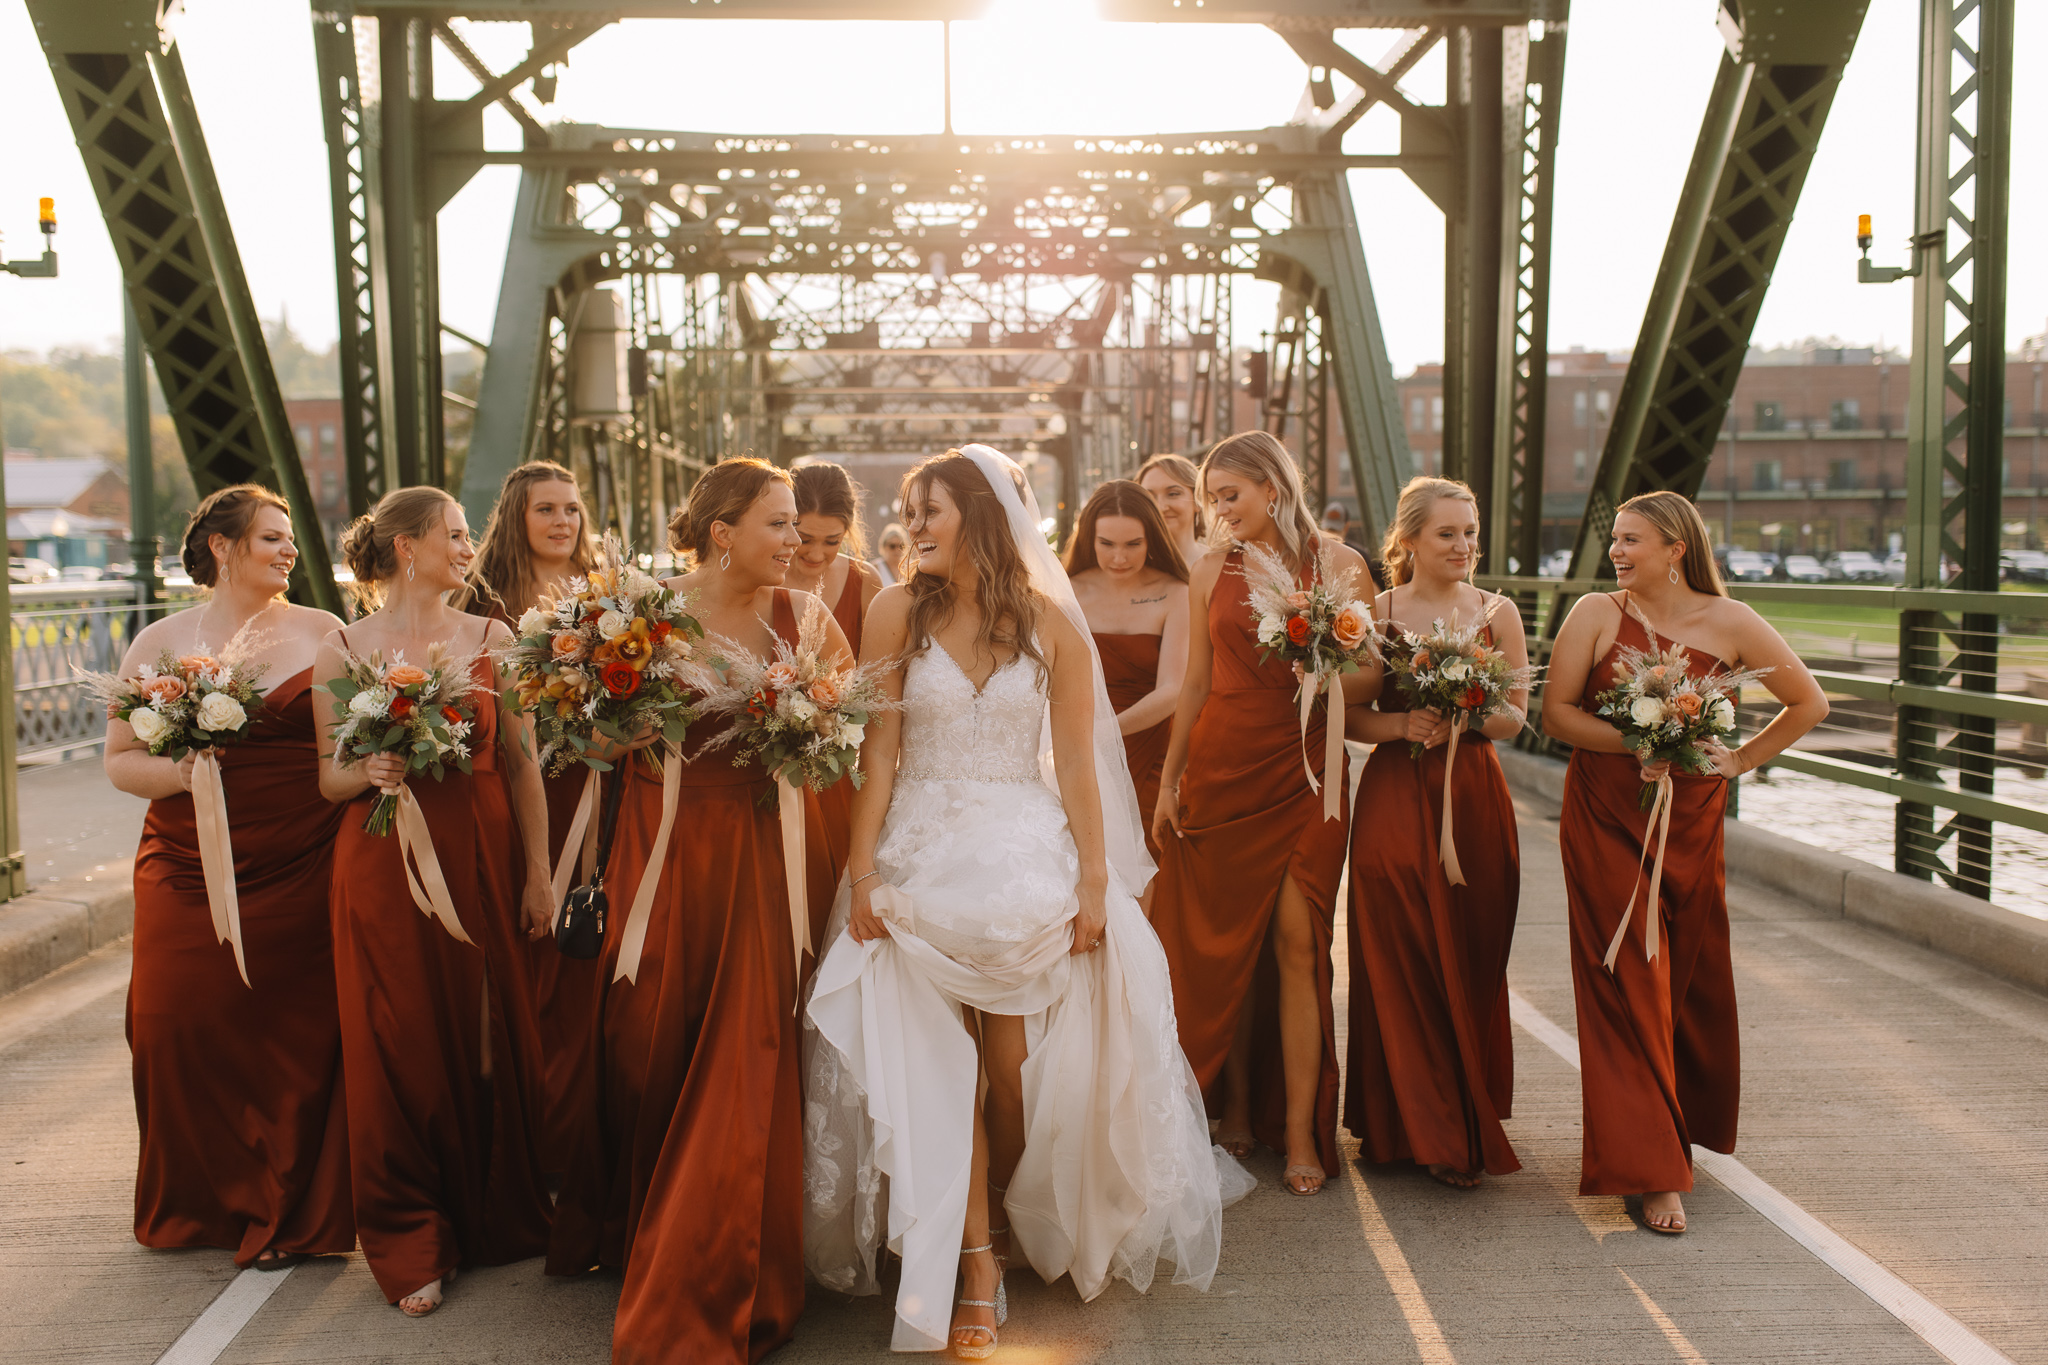 Professional wedding photography of a bride and her bridesmaids walking across the Stillwater bridge in Minnesota as the sun is setting